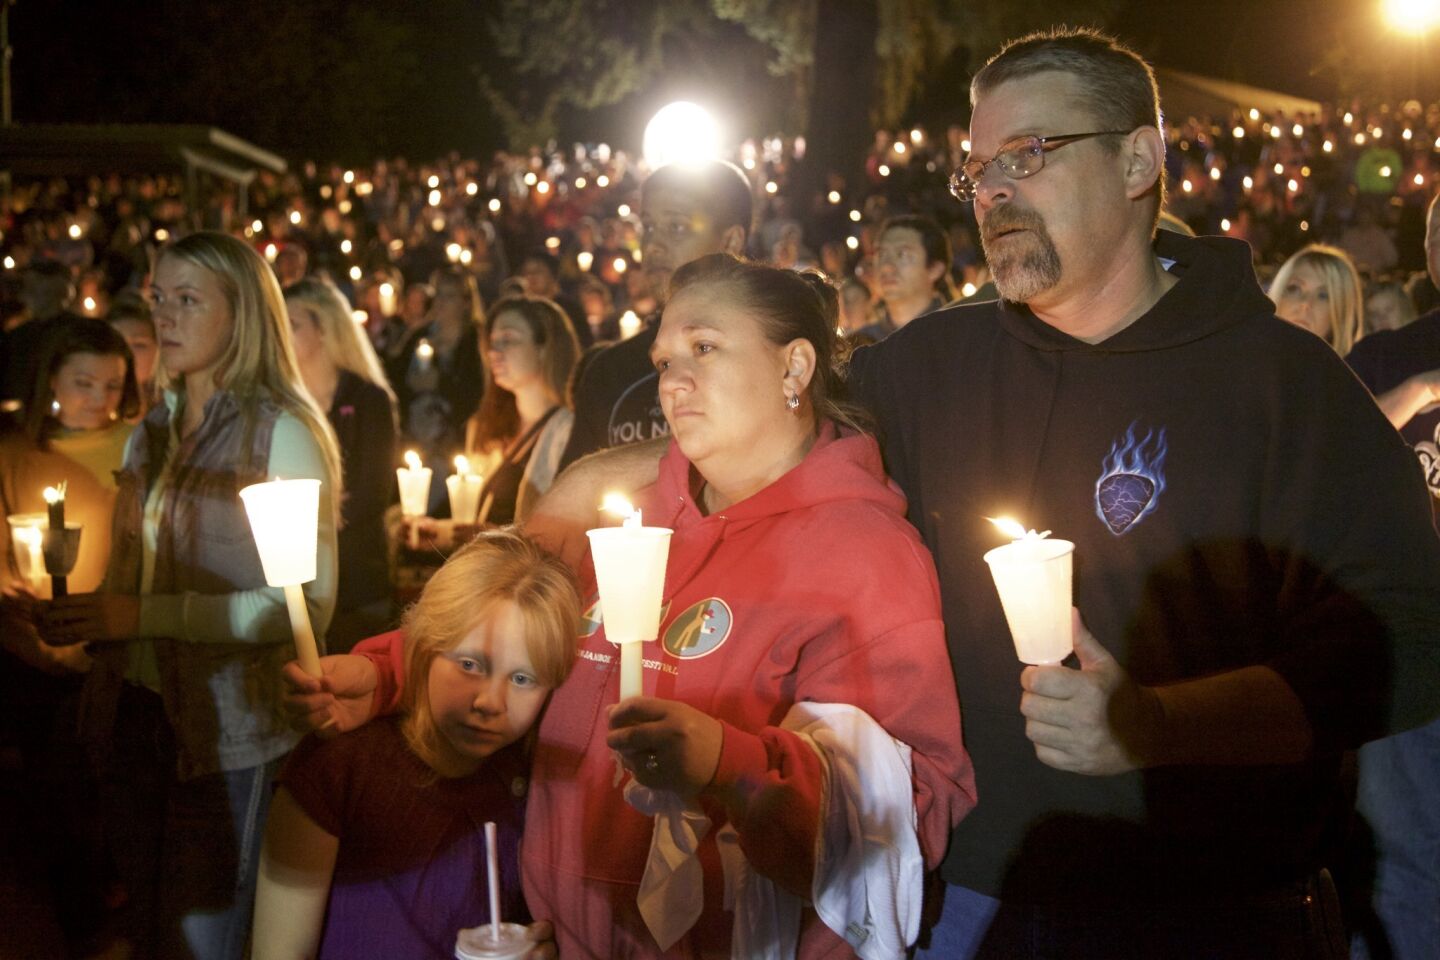 Residents of Roseburg, Ore., hold a candlelight vigil for victims of the shooting at Umpqua Community College on Oct. 1.